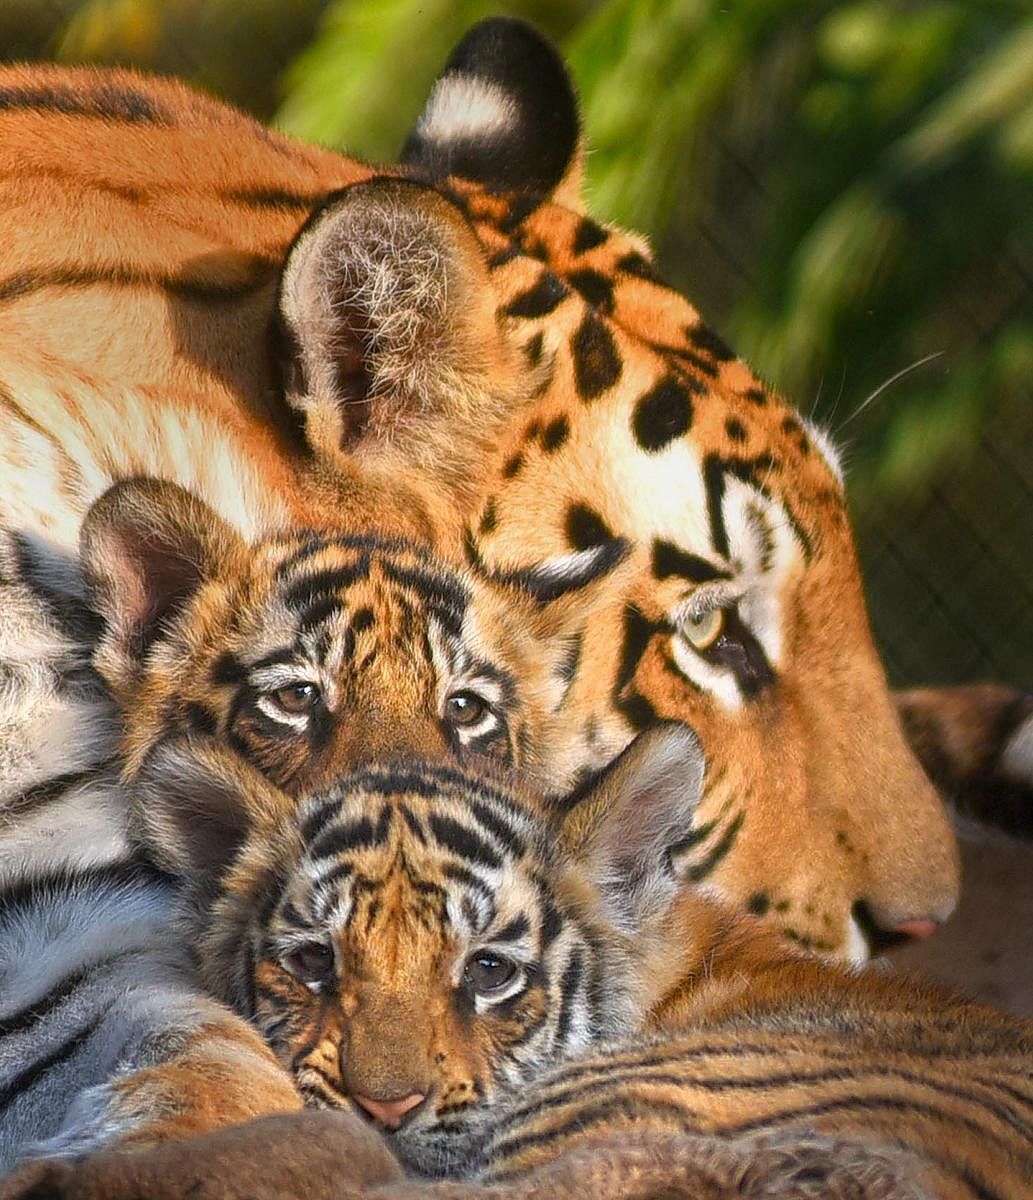 A tigeress rests with newborn cubs at a zoo, in Indore, Wednesday, Dec. 19, 2018. (PTI Photo)